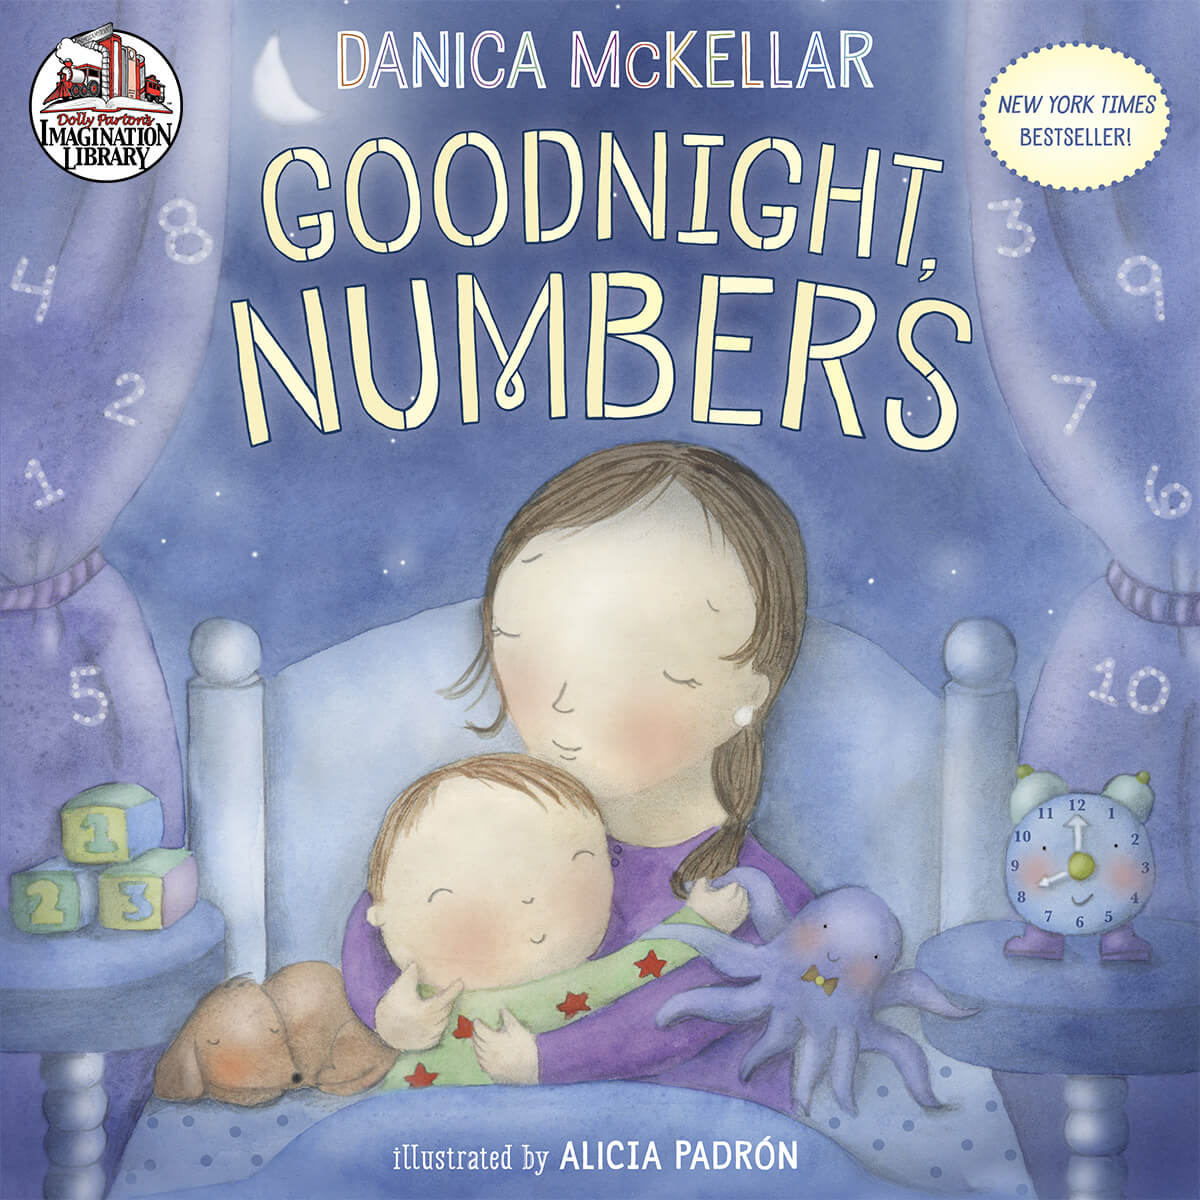 Goodnight Numbers - Dolly Parton's Imagination Library